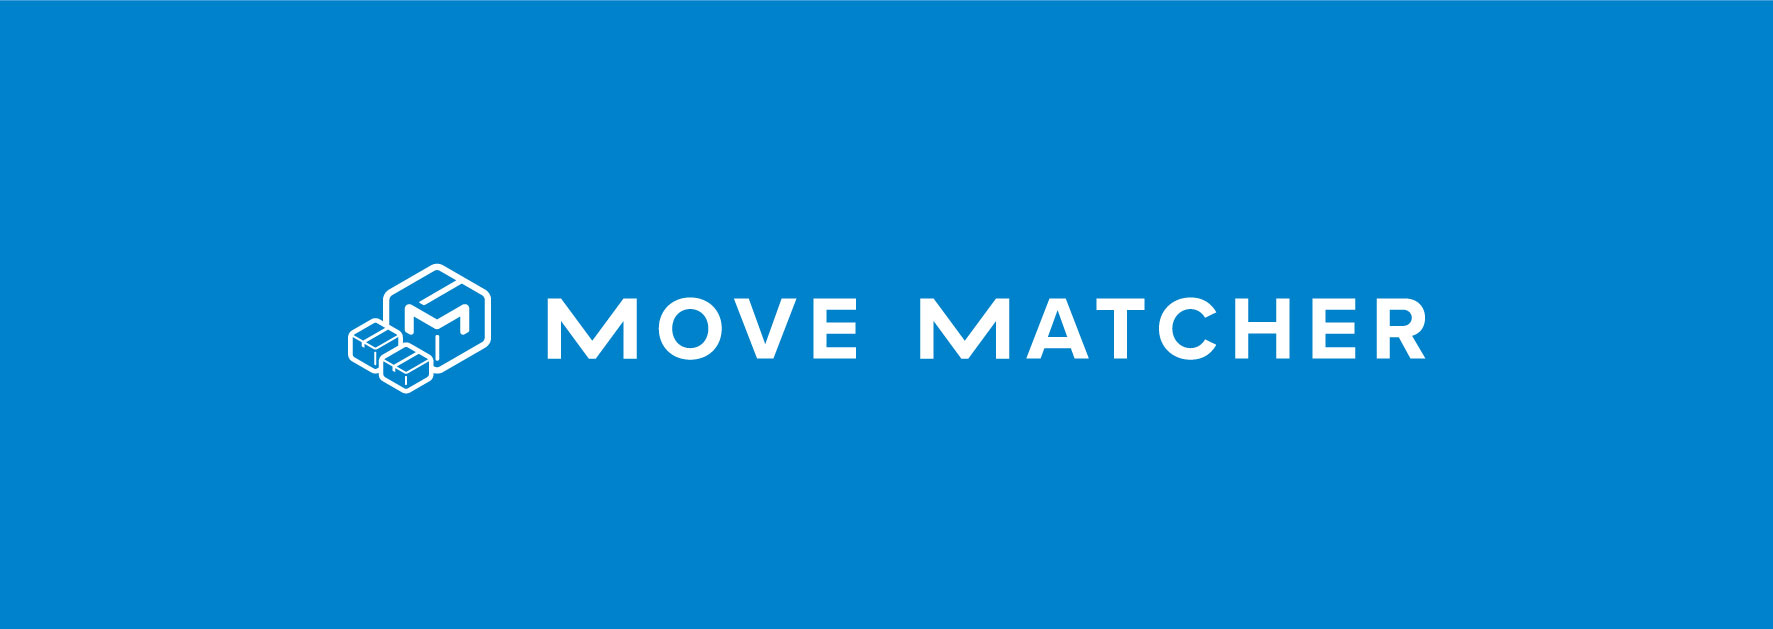 Move Matcher Continues to Integrate with Top CRM Platforms